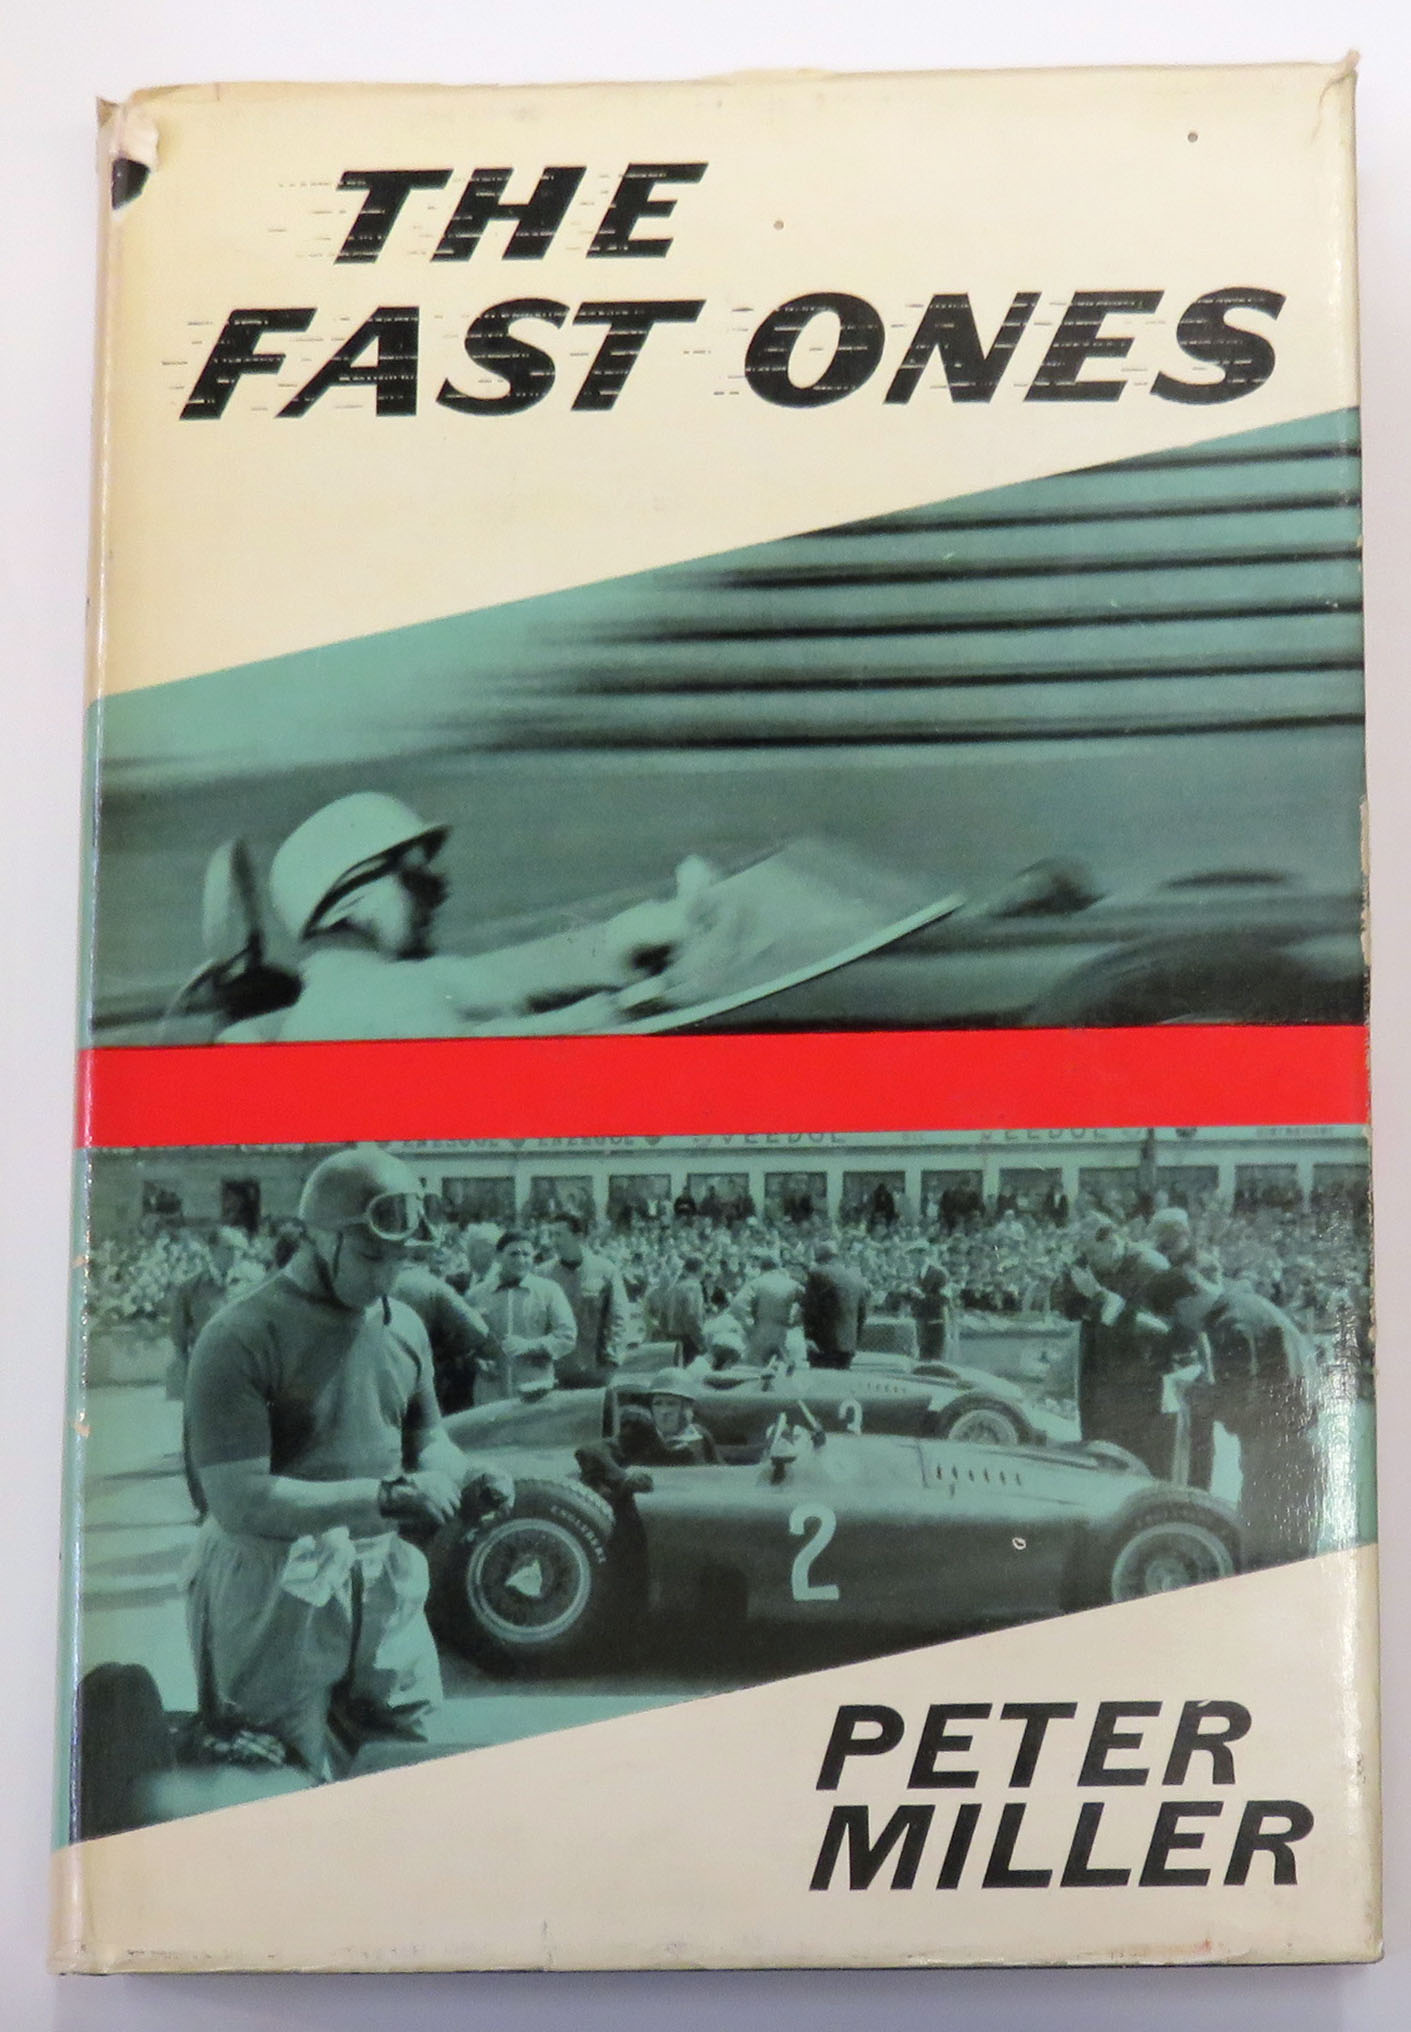 The Fast Ones